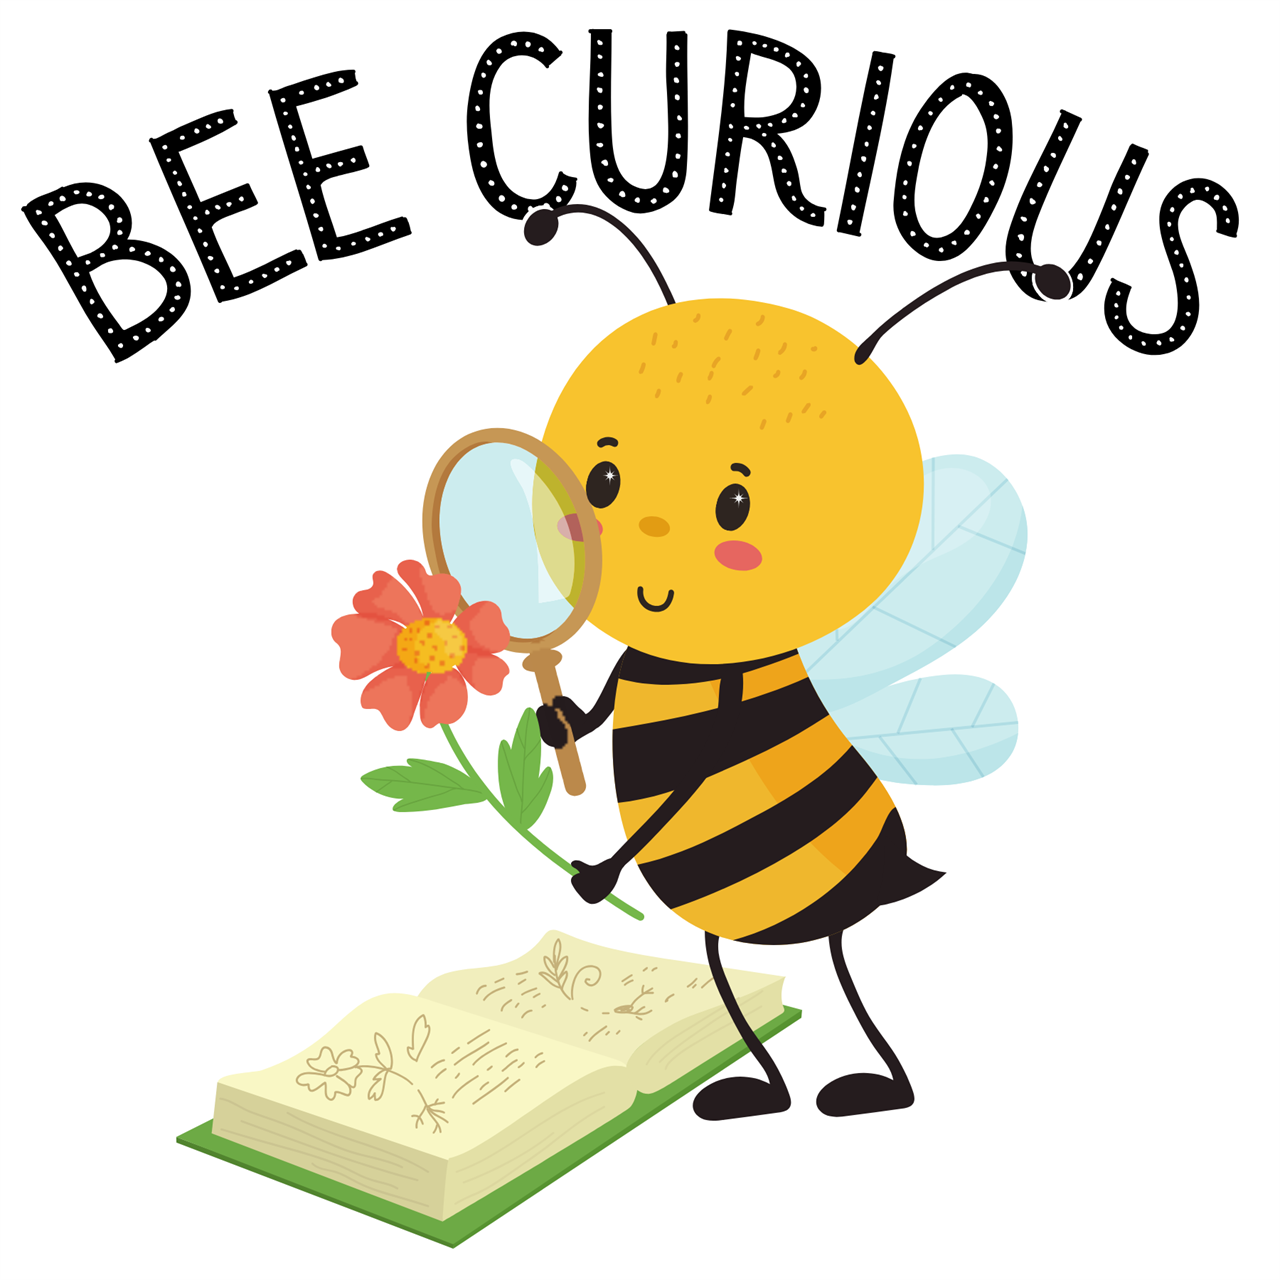 Logo for Bee Curious with honeybee cartoon looking through a magnifying glass at a flower